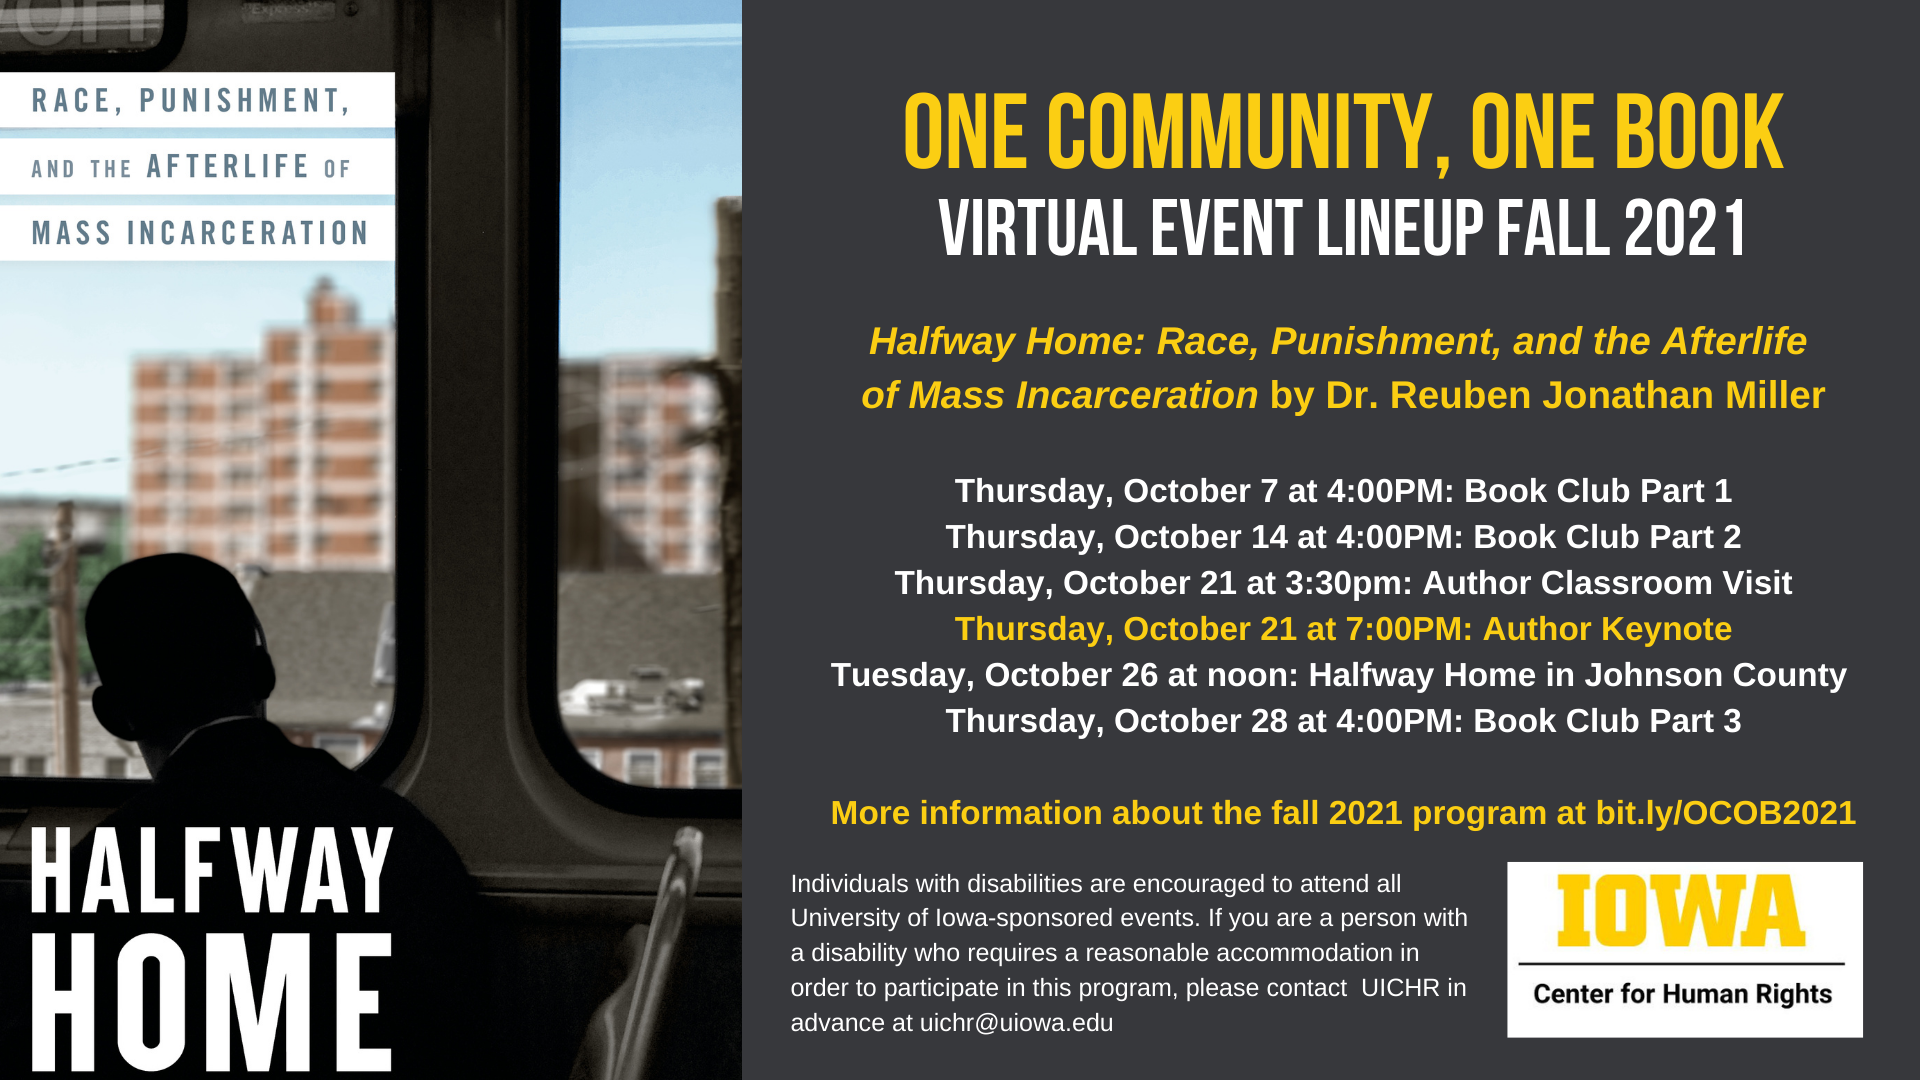 One Community, One Book    Virtual event lineup Fall 2021    Halfway Home: Race, Punishment, and the Afterlife    of Mass Incarceration by Dr. Reuben Jonathan Miller        Thursday, October 7 at 4:00PM: Book Club Part 1    Thursday, October 14 at 4:00PM: Book Club Part 2    Thursday, October 21 at 3:30pm: Author Classroom Visit    Thursday, October 21 at 7:00PM: Author Keynote    Tuesday, October 26 at noon: Halfway Home in Johnson County    Thursday, October 28 at 4:00PM: Book Club Part 3        More information about the fall 2021 program at bit.ly/OCOB2021    